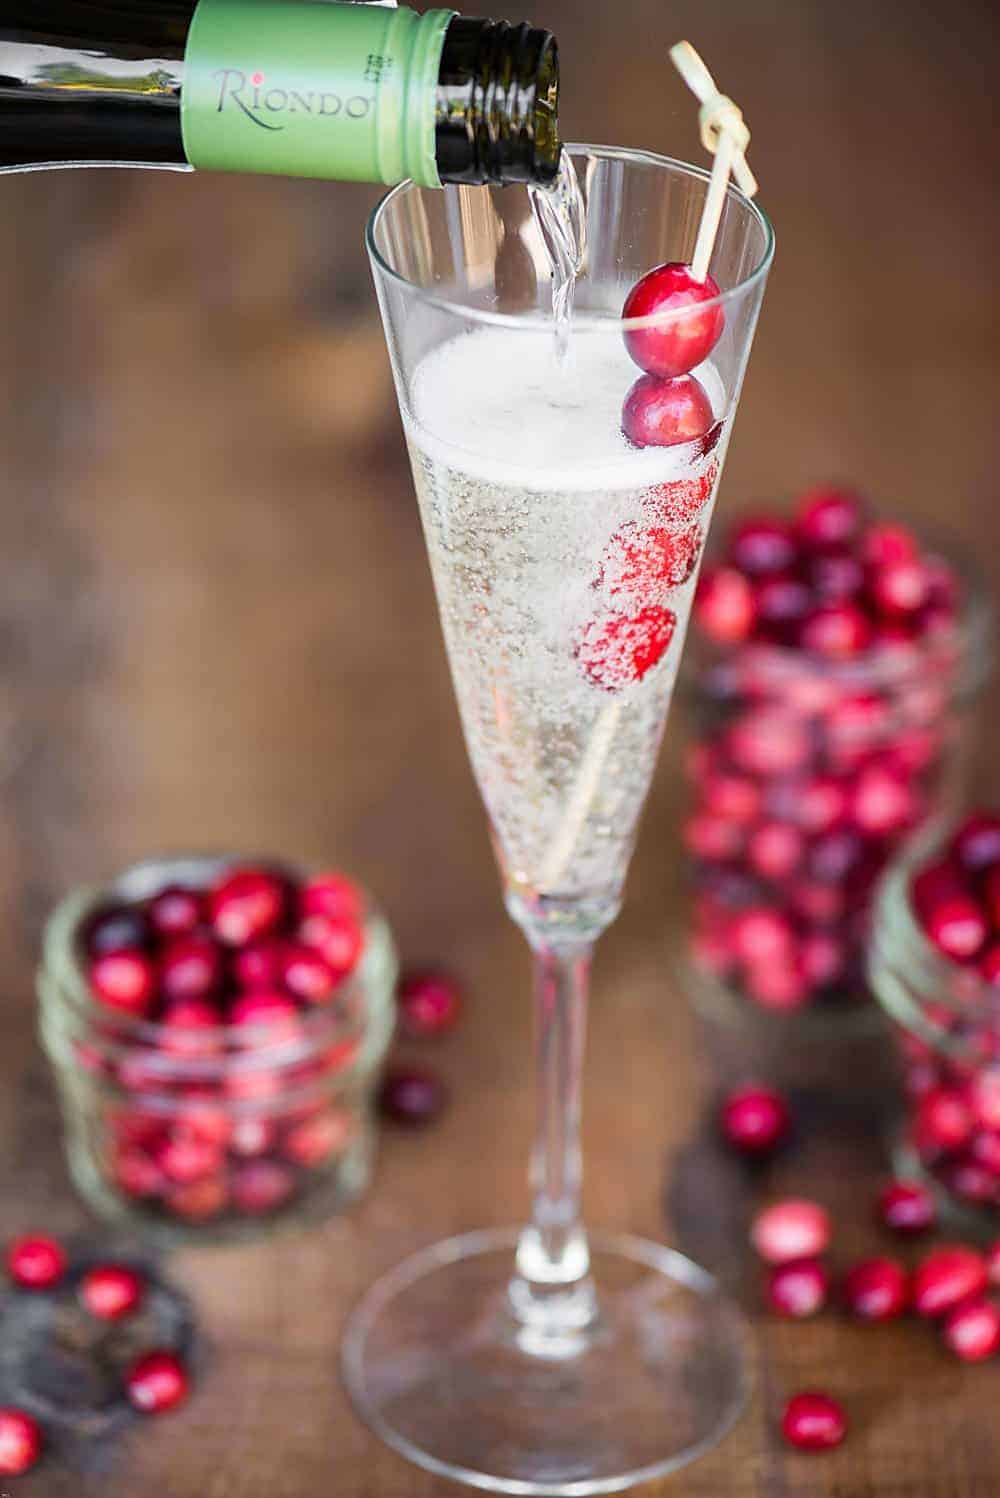 Orange Cranberry Prosecco is an easy single serving winter cocktail made from sweetened tart cranberry juice, orange liqueur, and Riondo Prosecco.